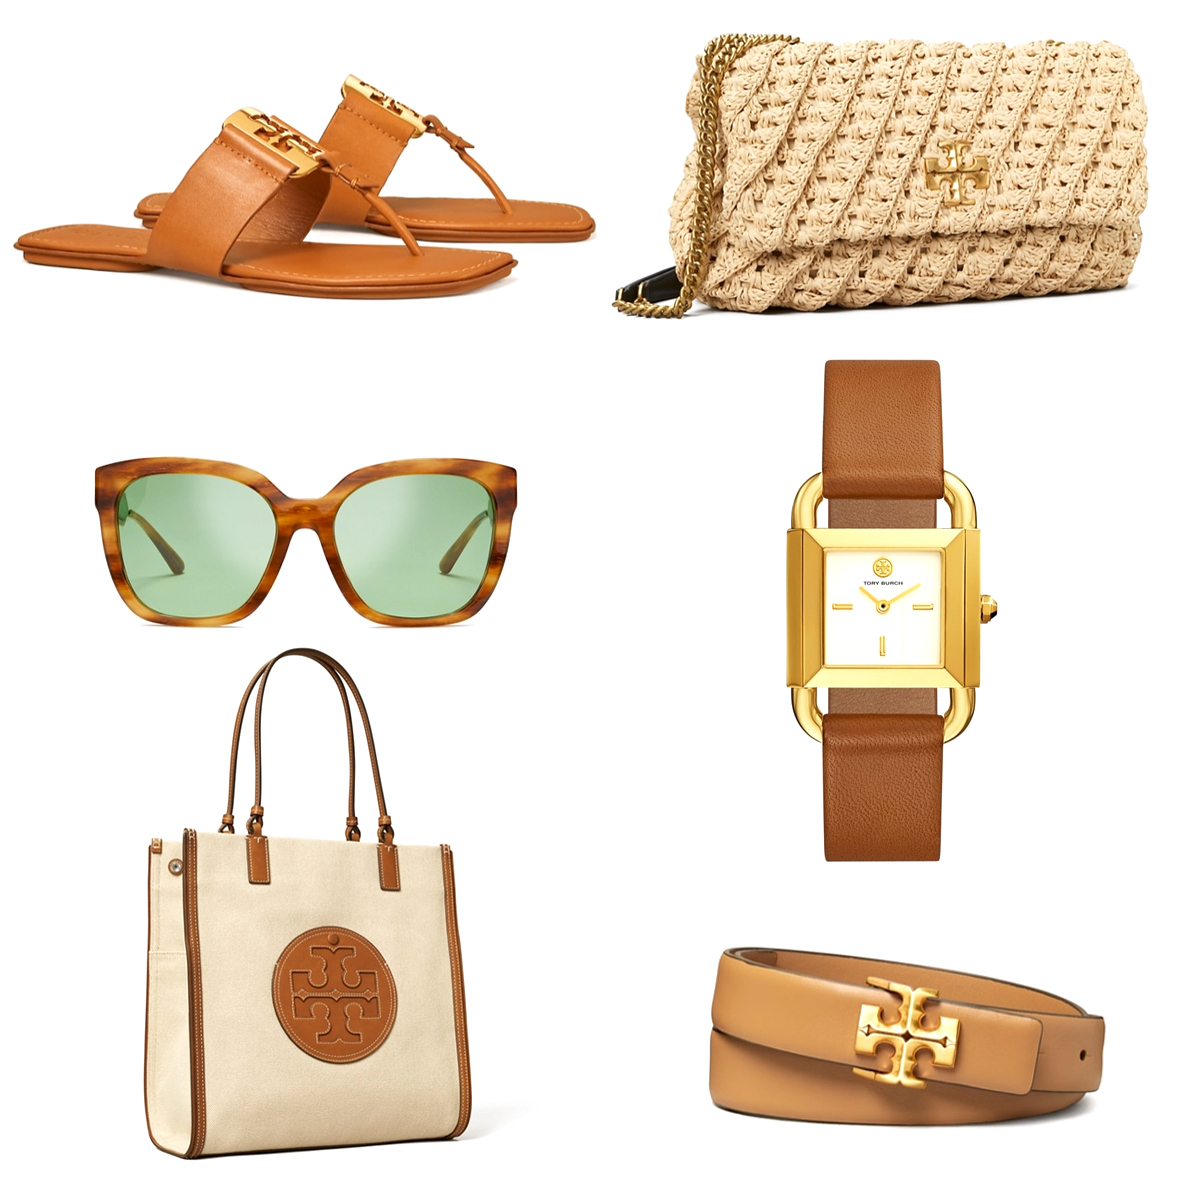 Tory Burch Private Sale 2021: 25 Best Fashion Deals to Shop